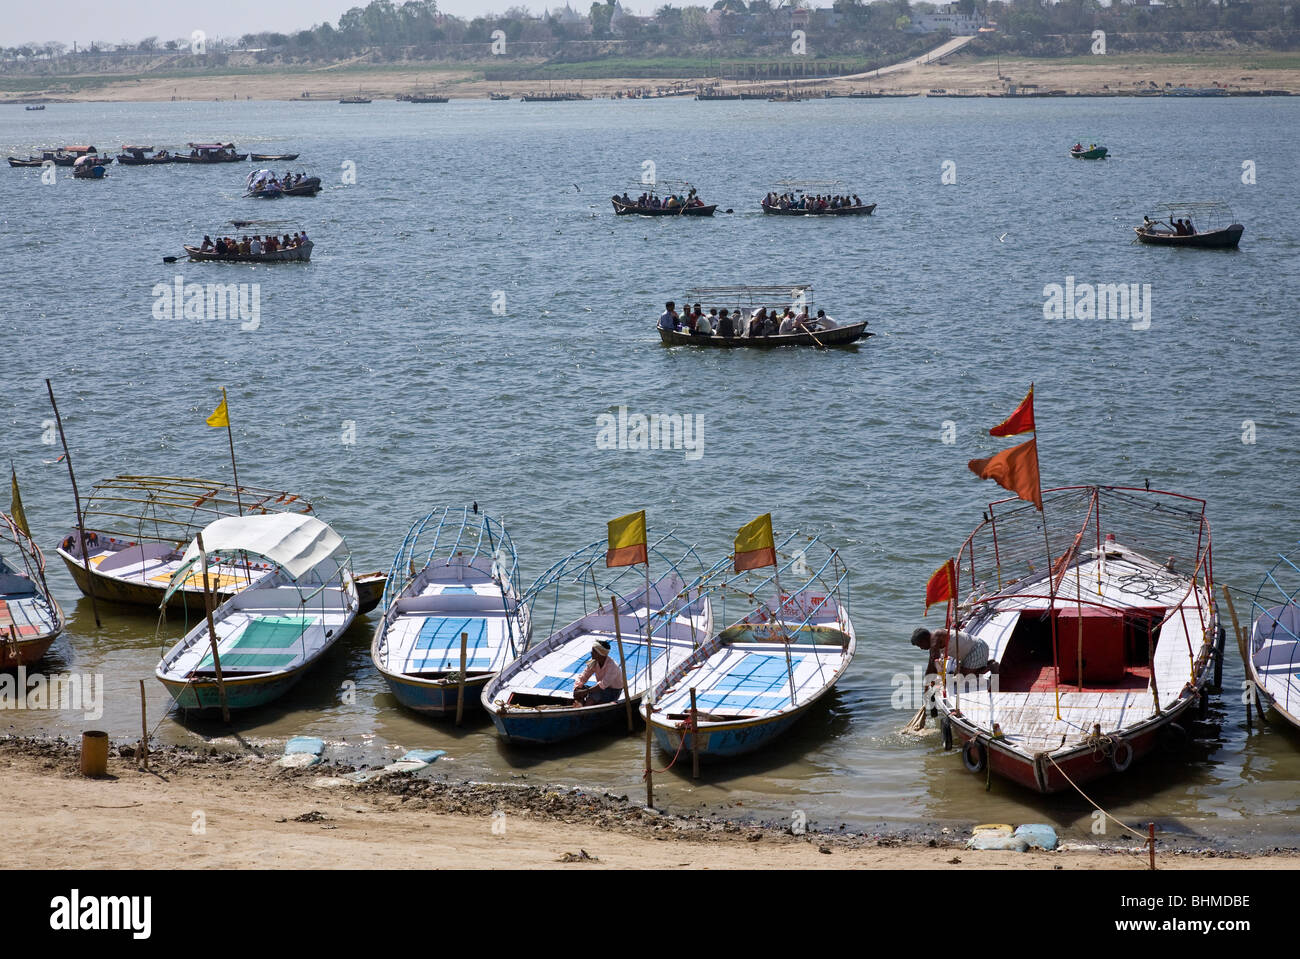 Boats fully loaded with hindu pilgrims. Sangam (the confluence of the Ganges and Yamuna rivers). Allahabad. India Stock Photo